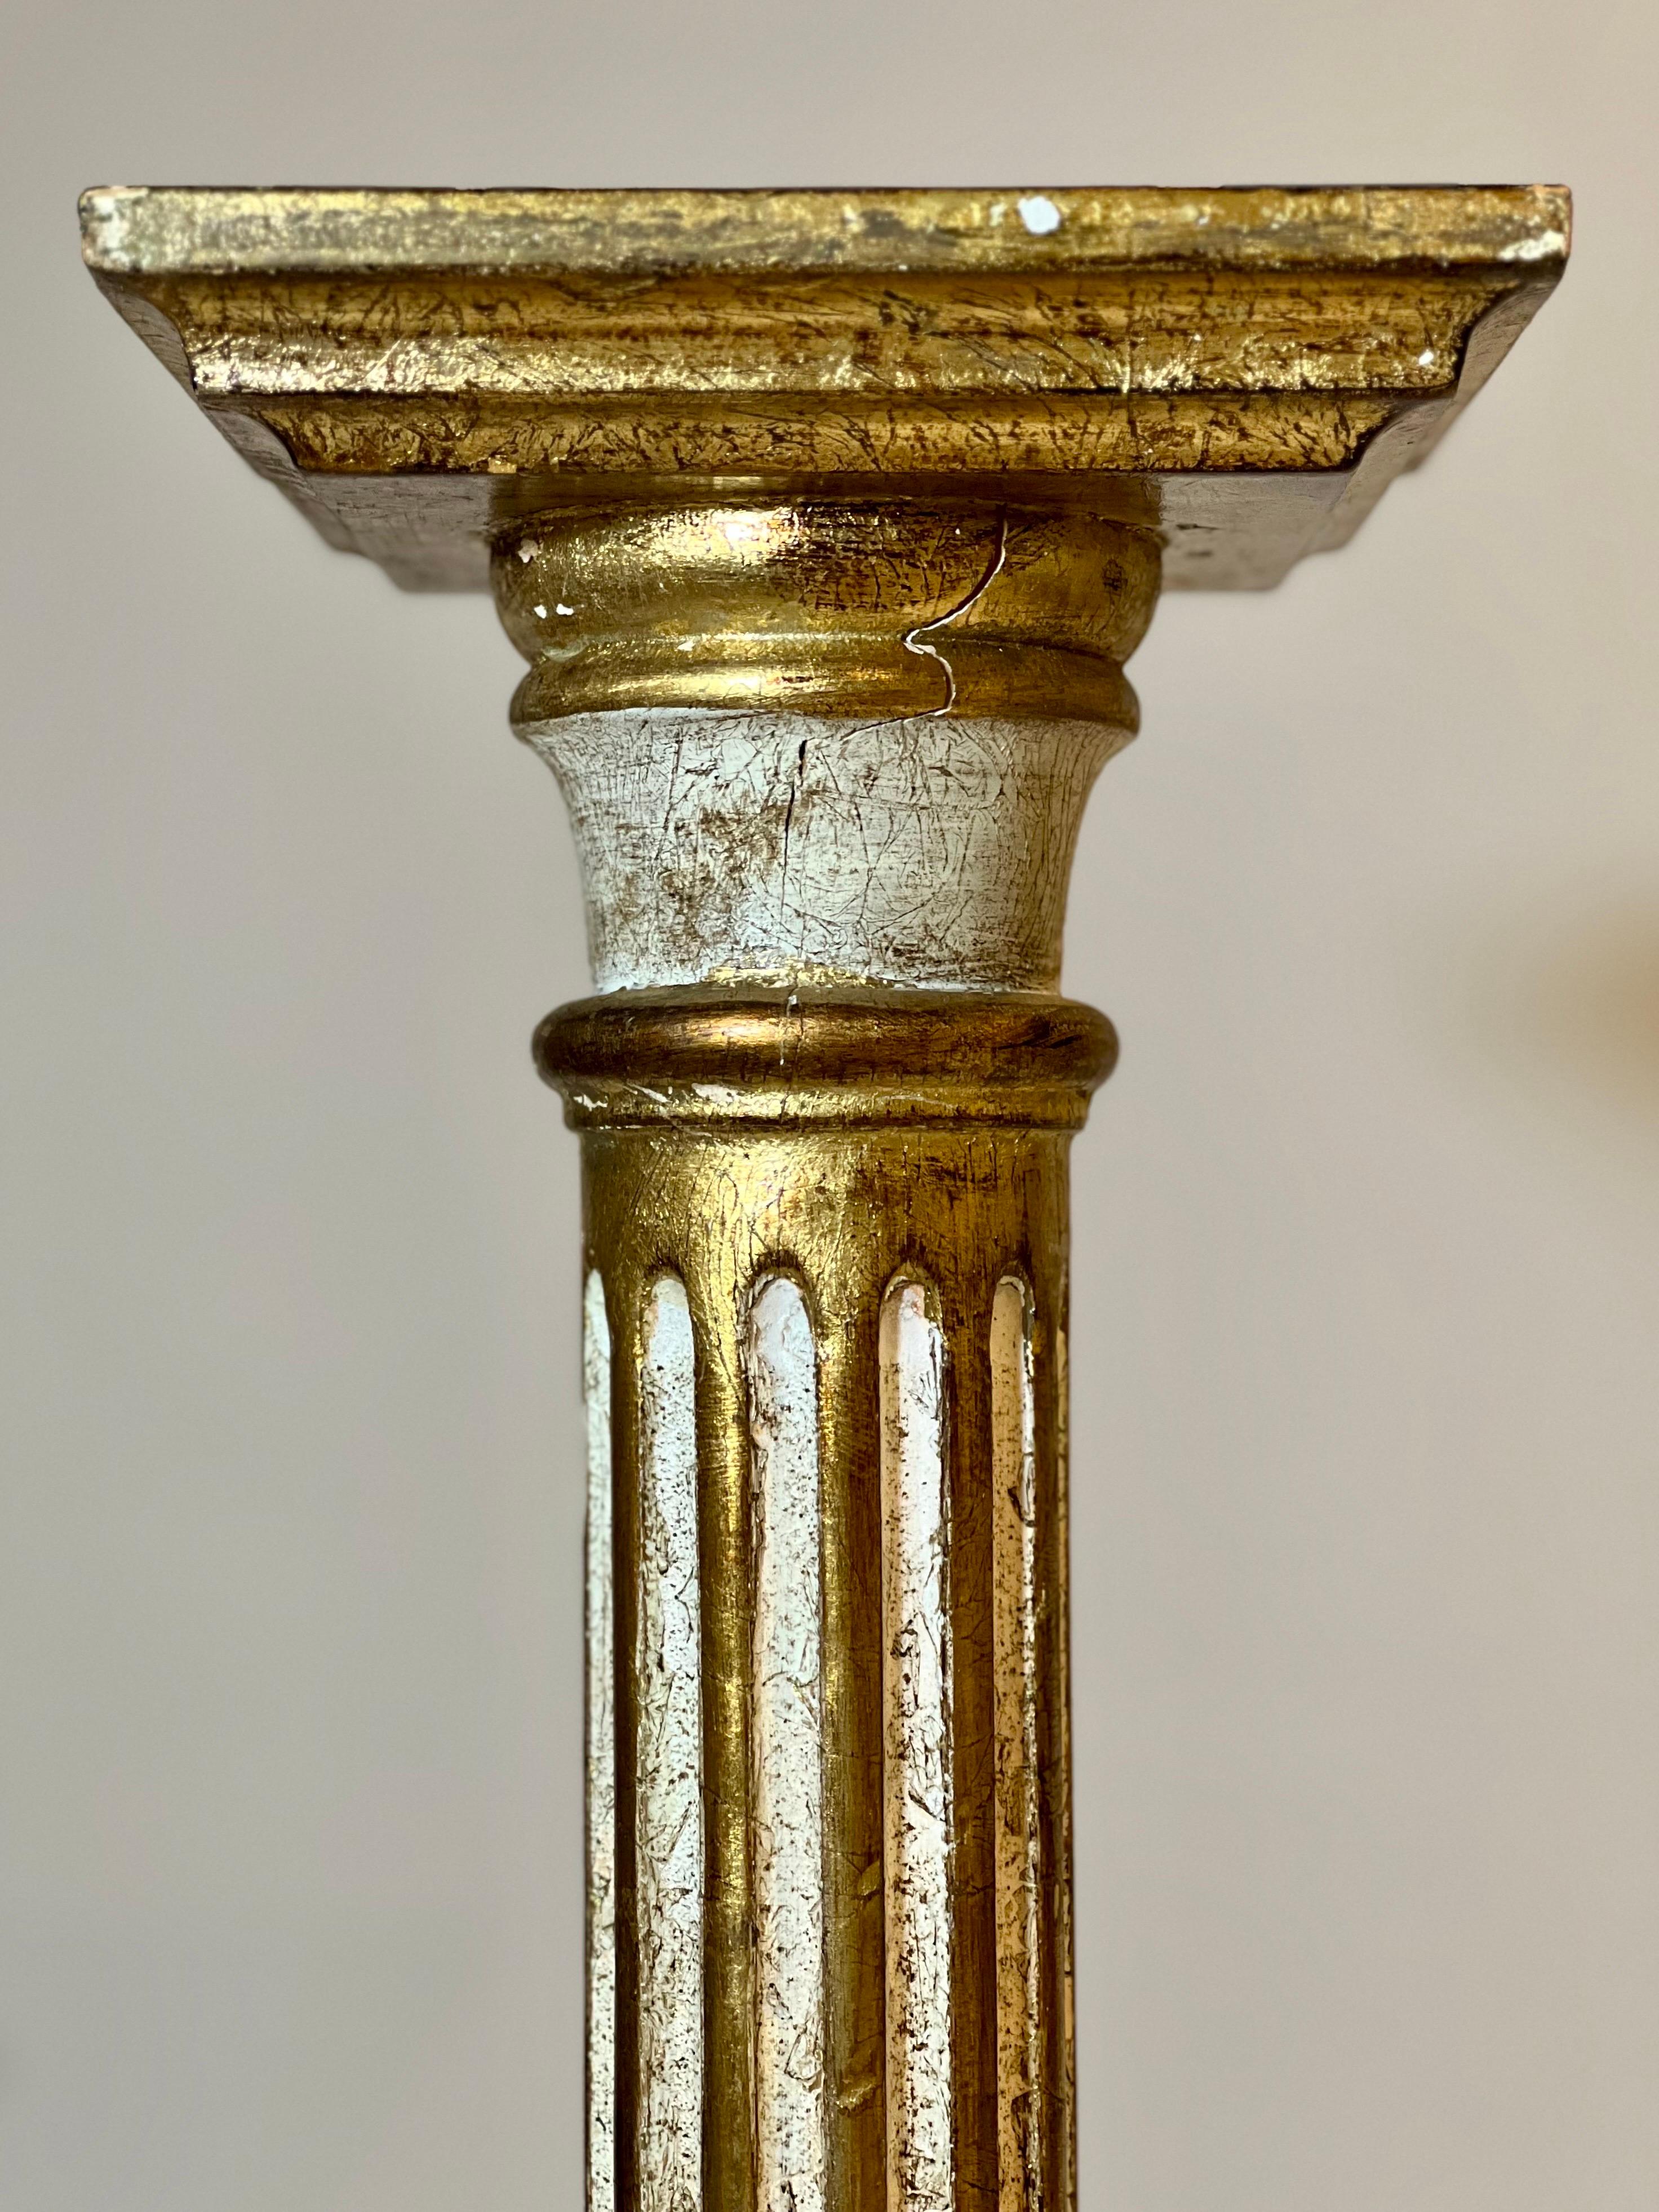 Florentine Neoclassical Fluted Cream and Gold Gilt Painted Column Pedestal In Good Condition For Sale In Doylestown, PA